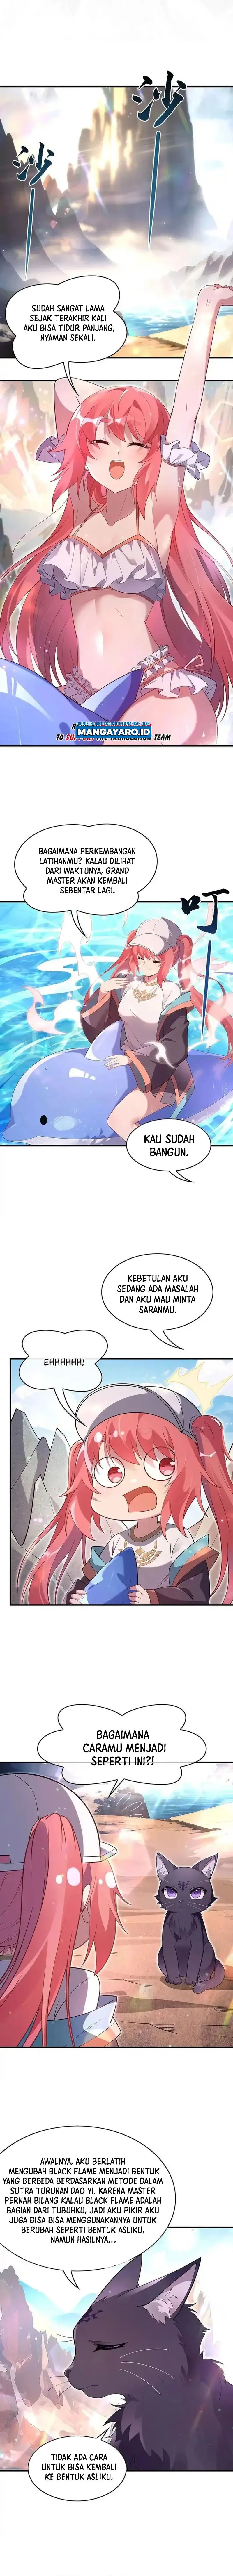 Dilarang COPAS - situs resmi www.mangacanblog.com - Komik my female apprentices are all big shots from the future 270 - chapter 270 271 Indonesia my female apprentices are all big shots from the future 270 - chapter 270 Terbaru 1|Baca Manga Komik Indonesia|Mangacan